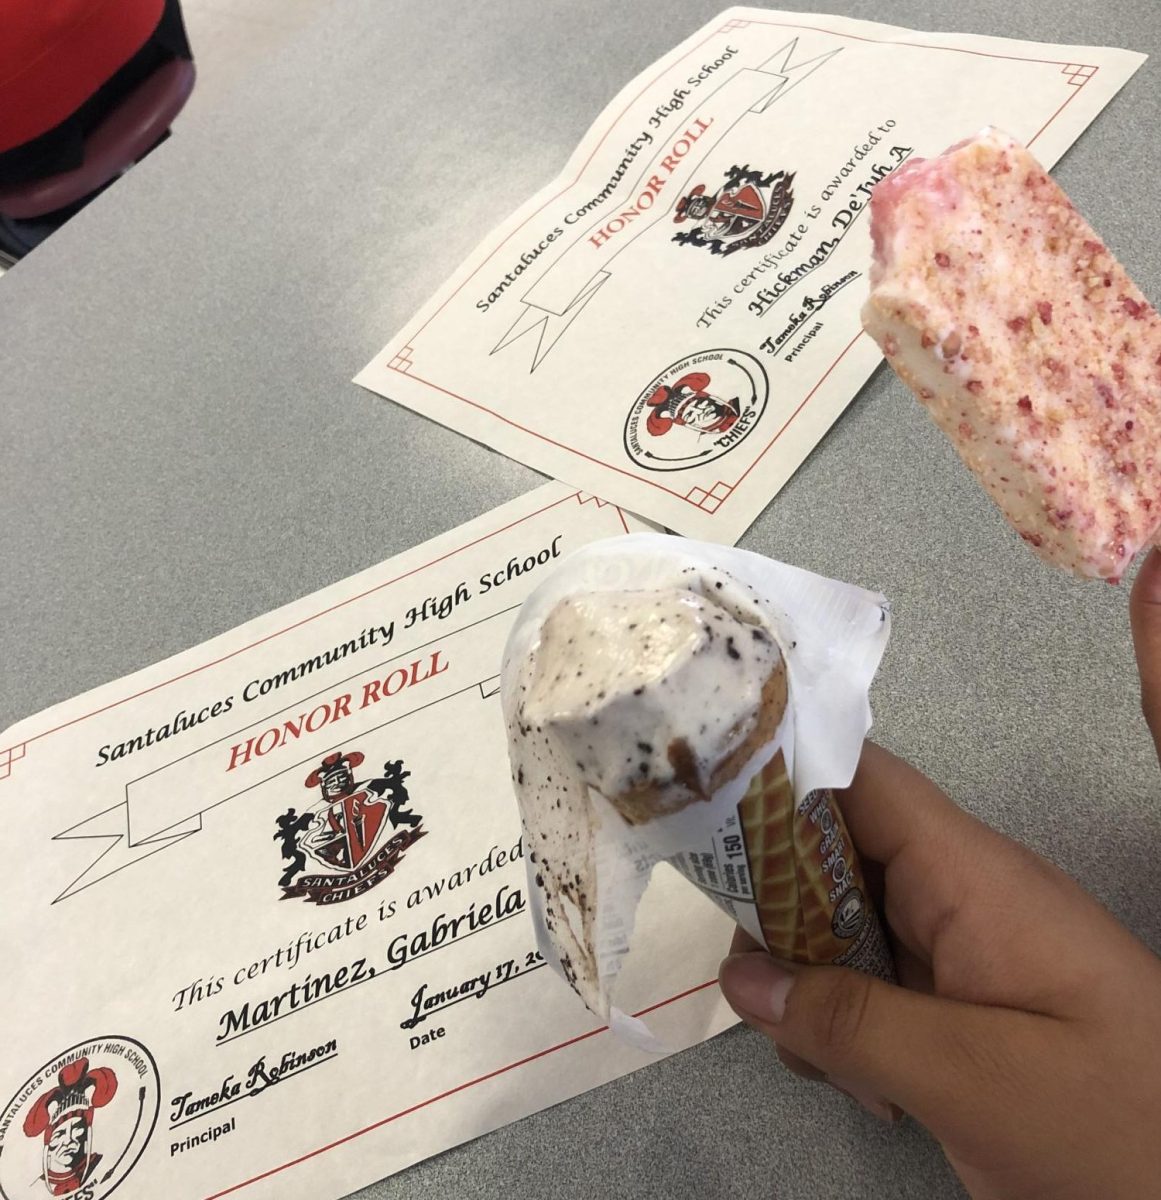 Me(Dejuh) and Gaby showing off our honor roll certificates while enjoying our strawberry shortcake and oreo ice creams.